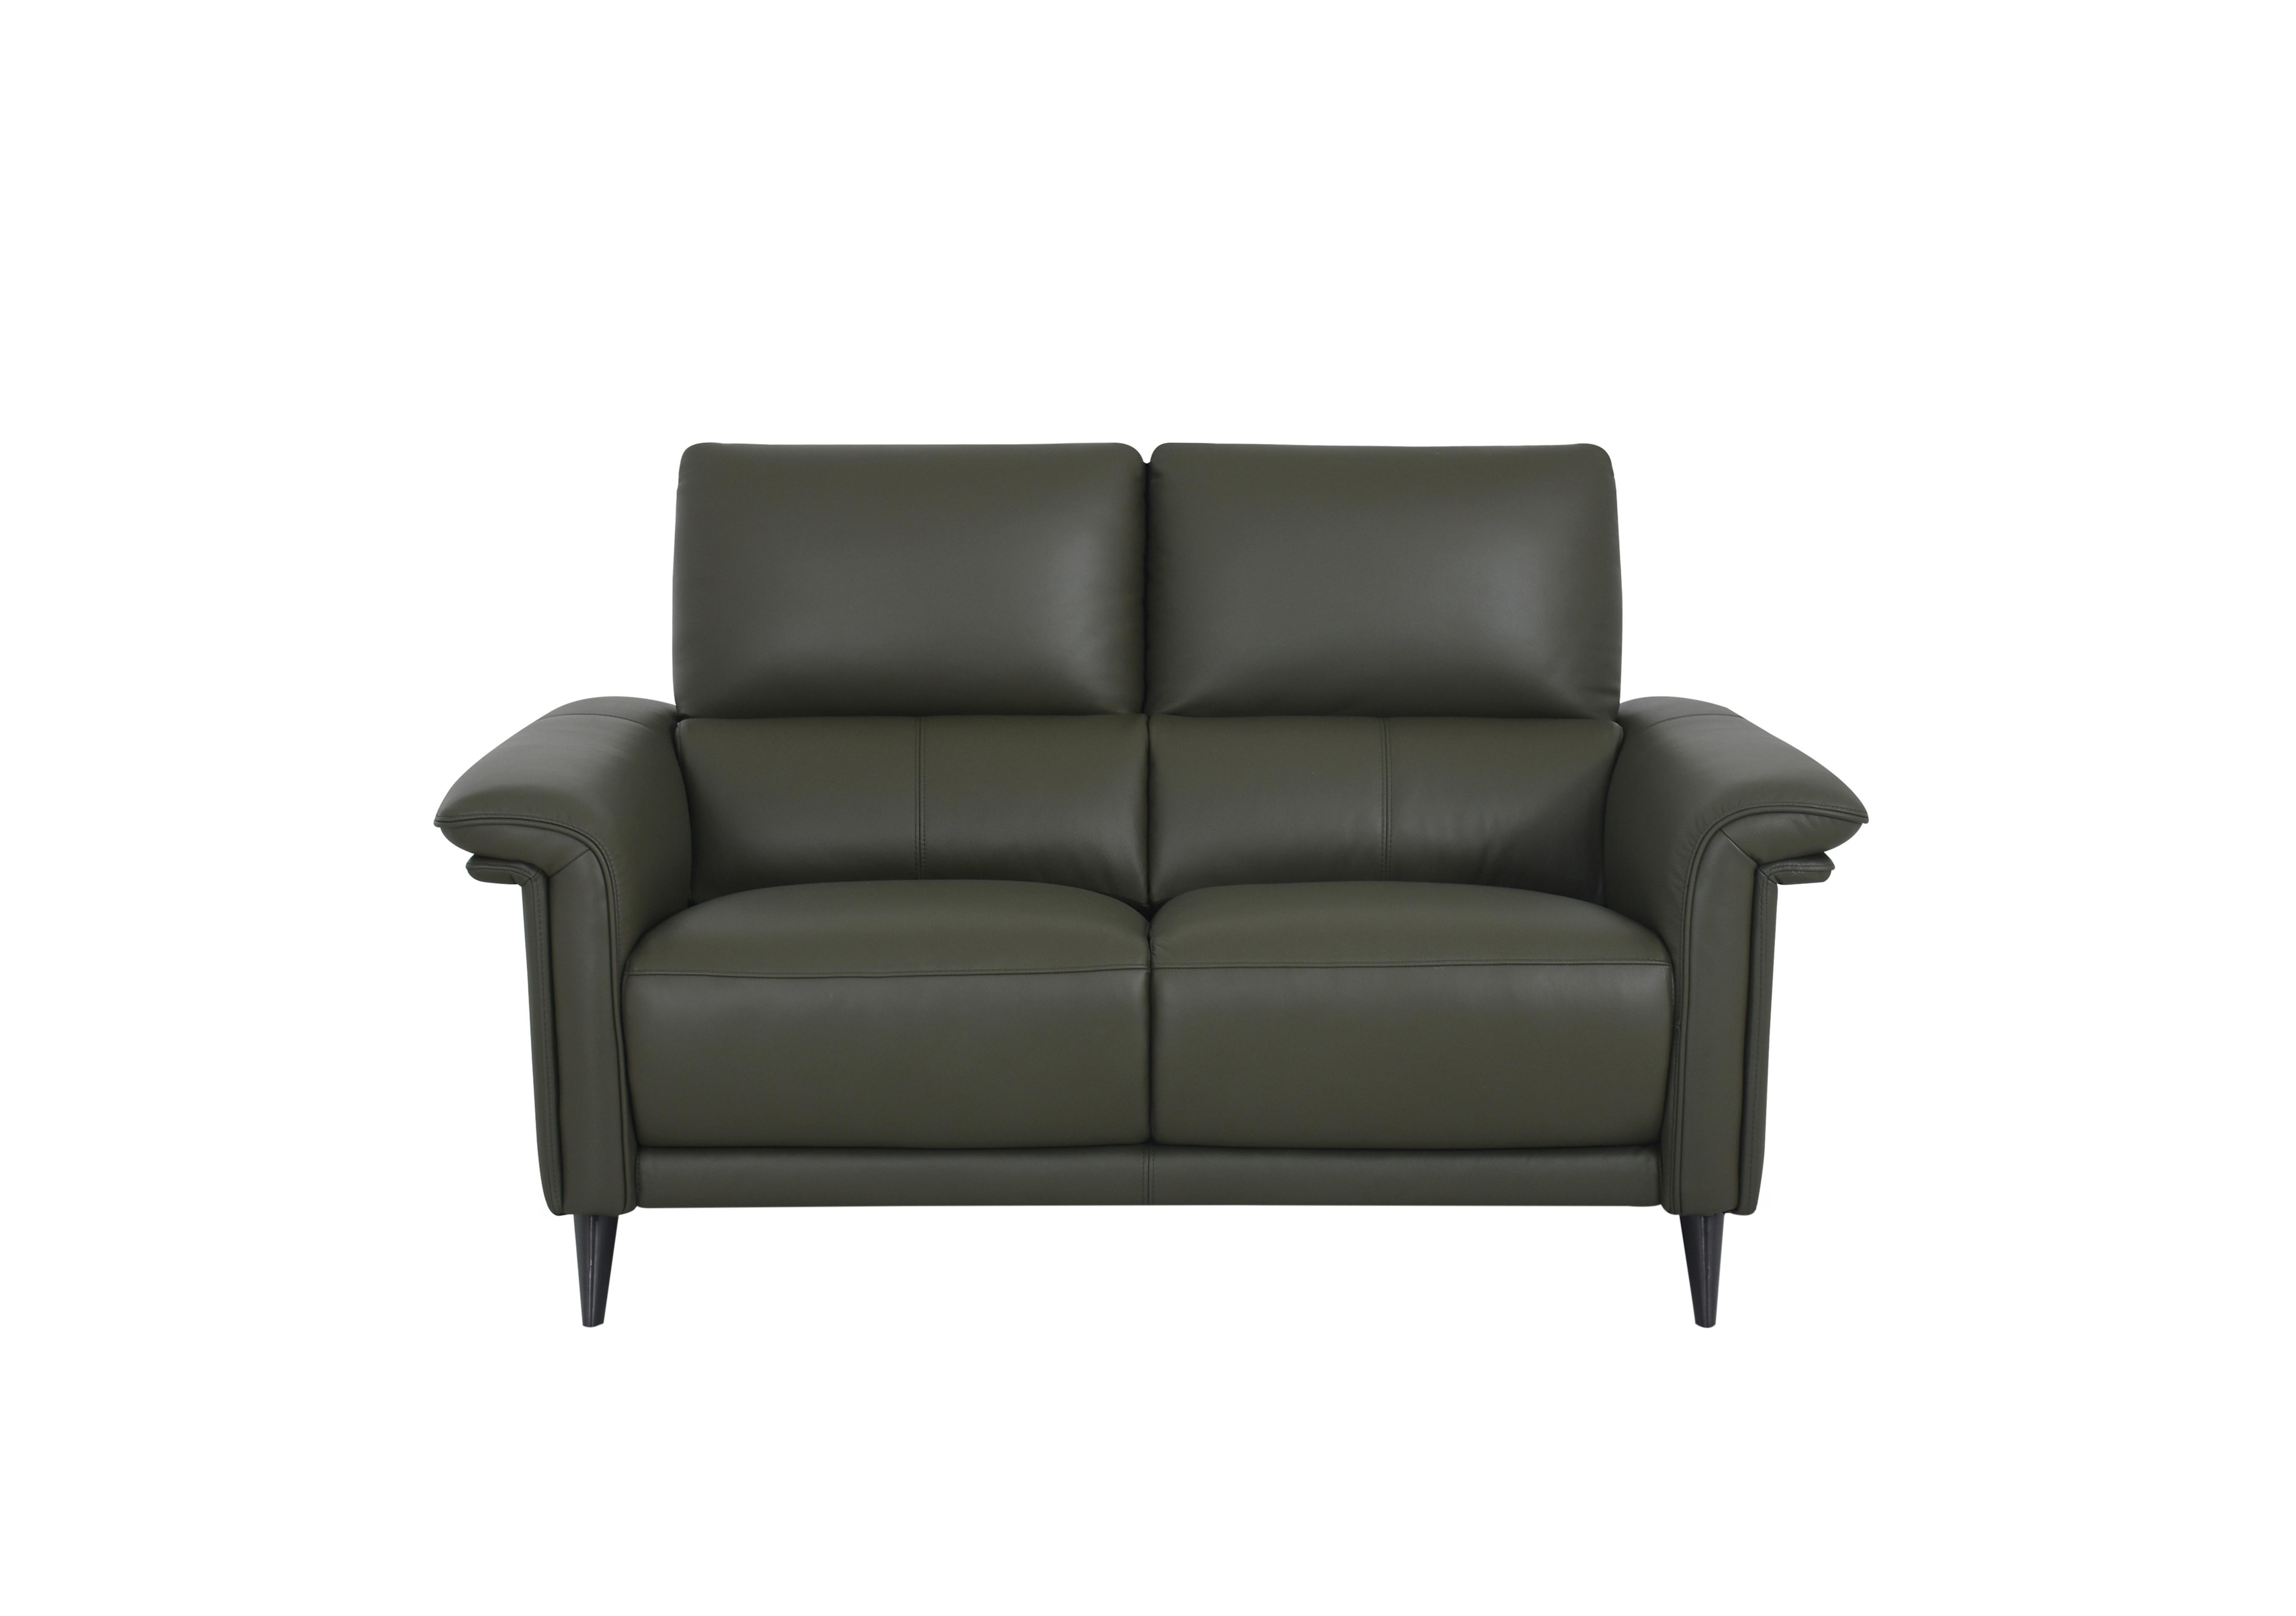 Huxley 2 Seater Leather Sofa in Np-548e Dark Olive on Furniture Village